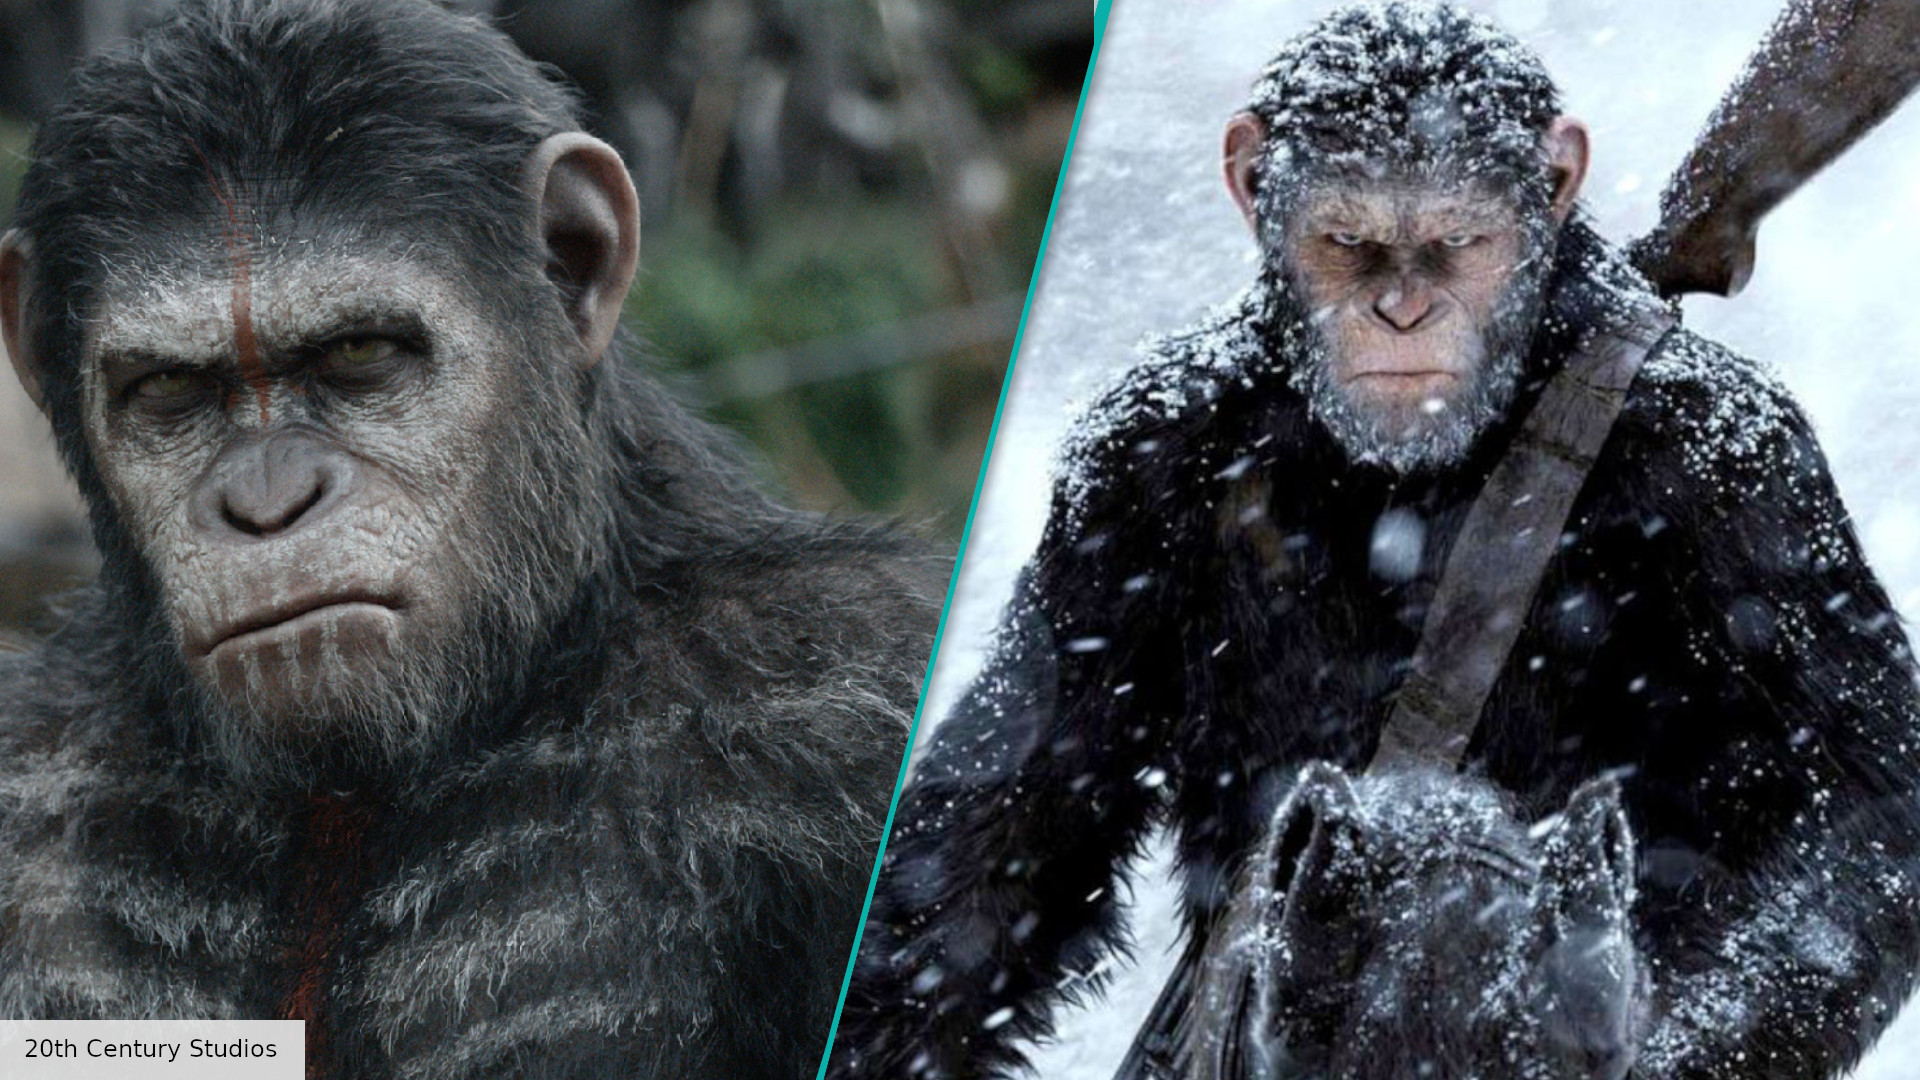 of the Apes franchise is getting a new movie